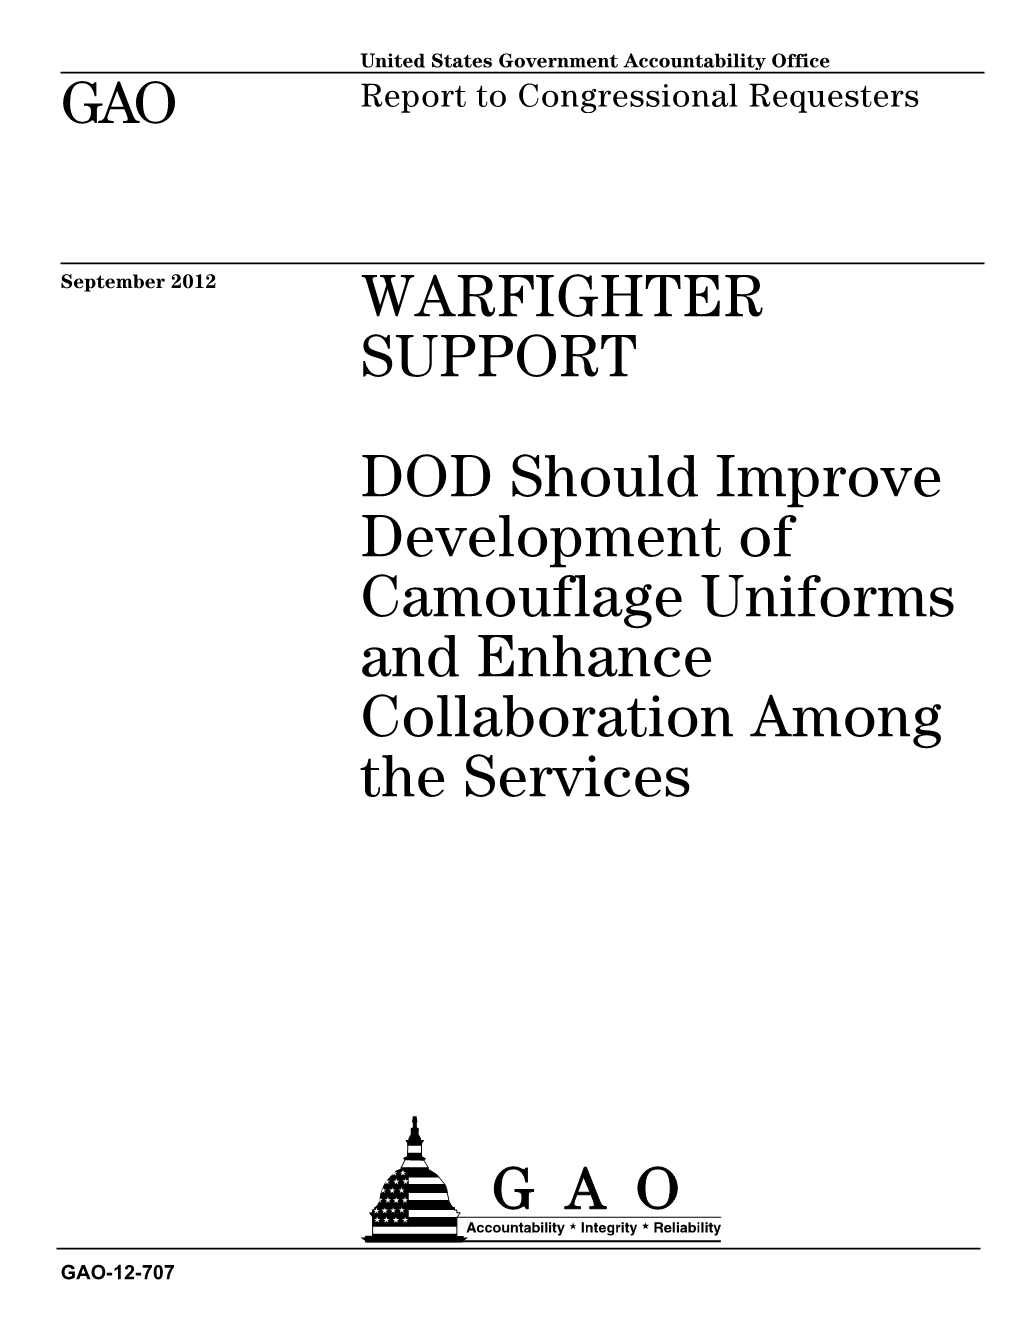 GAO-12-707, WARFIGHTER SUPPORT: DOD Should Improve